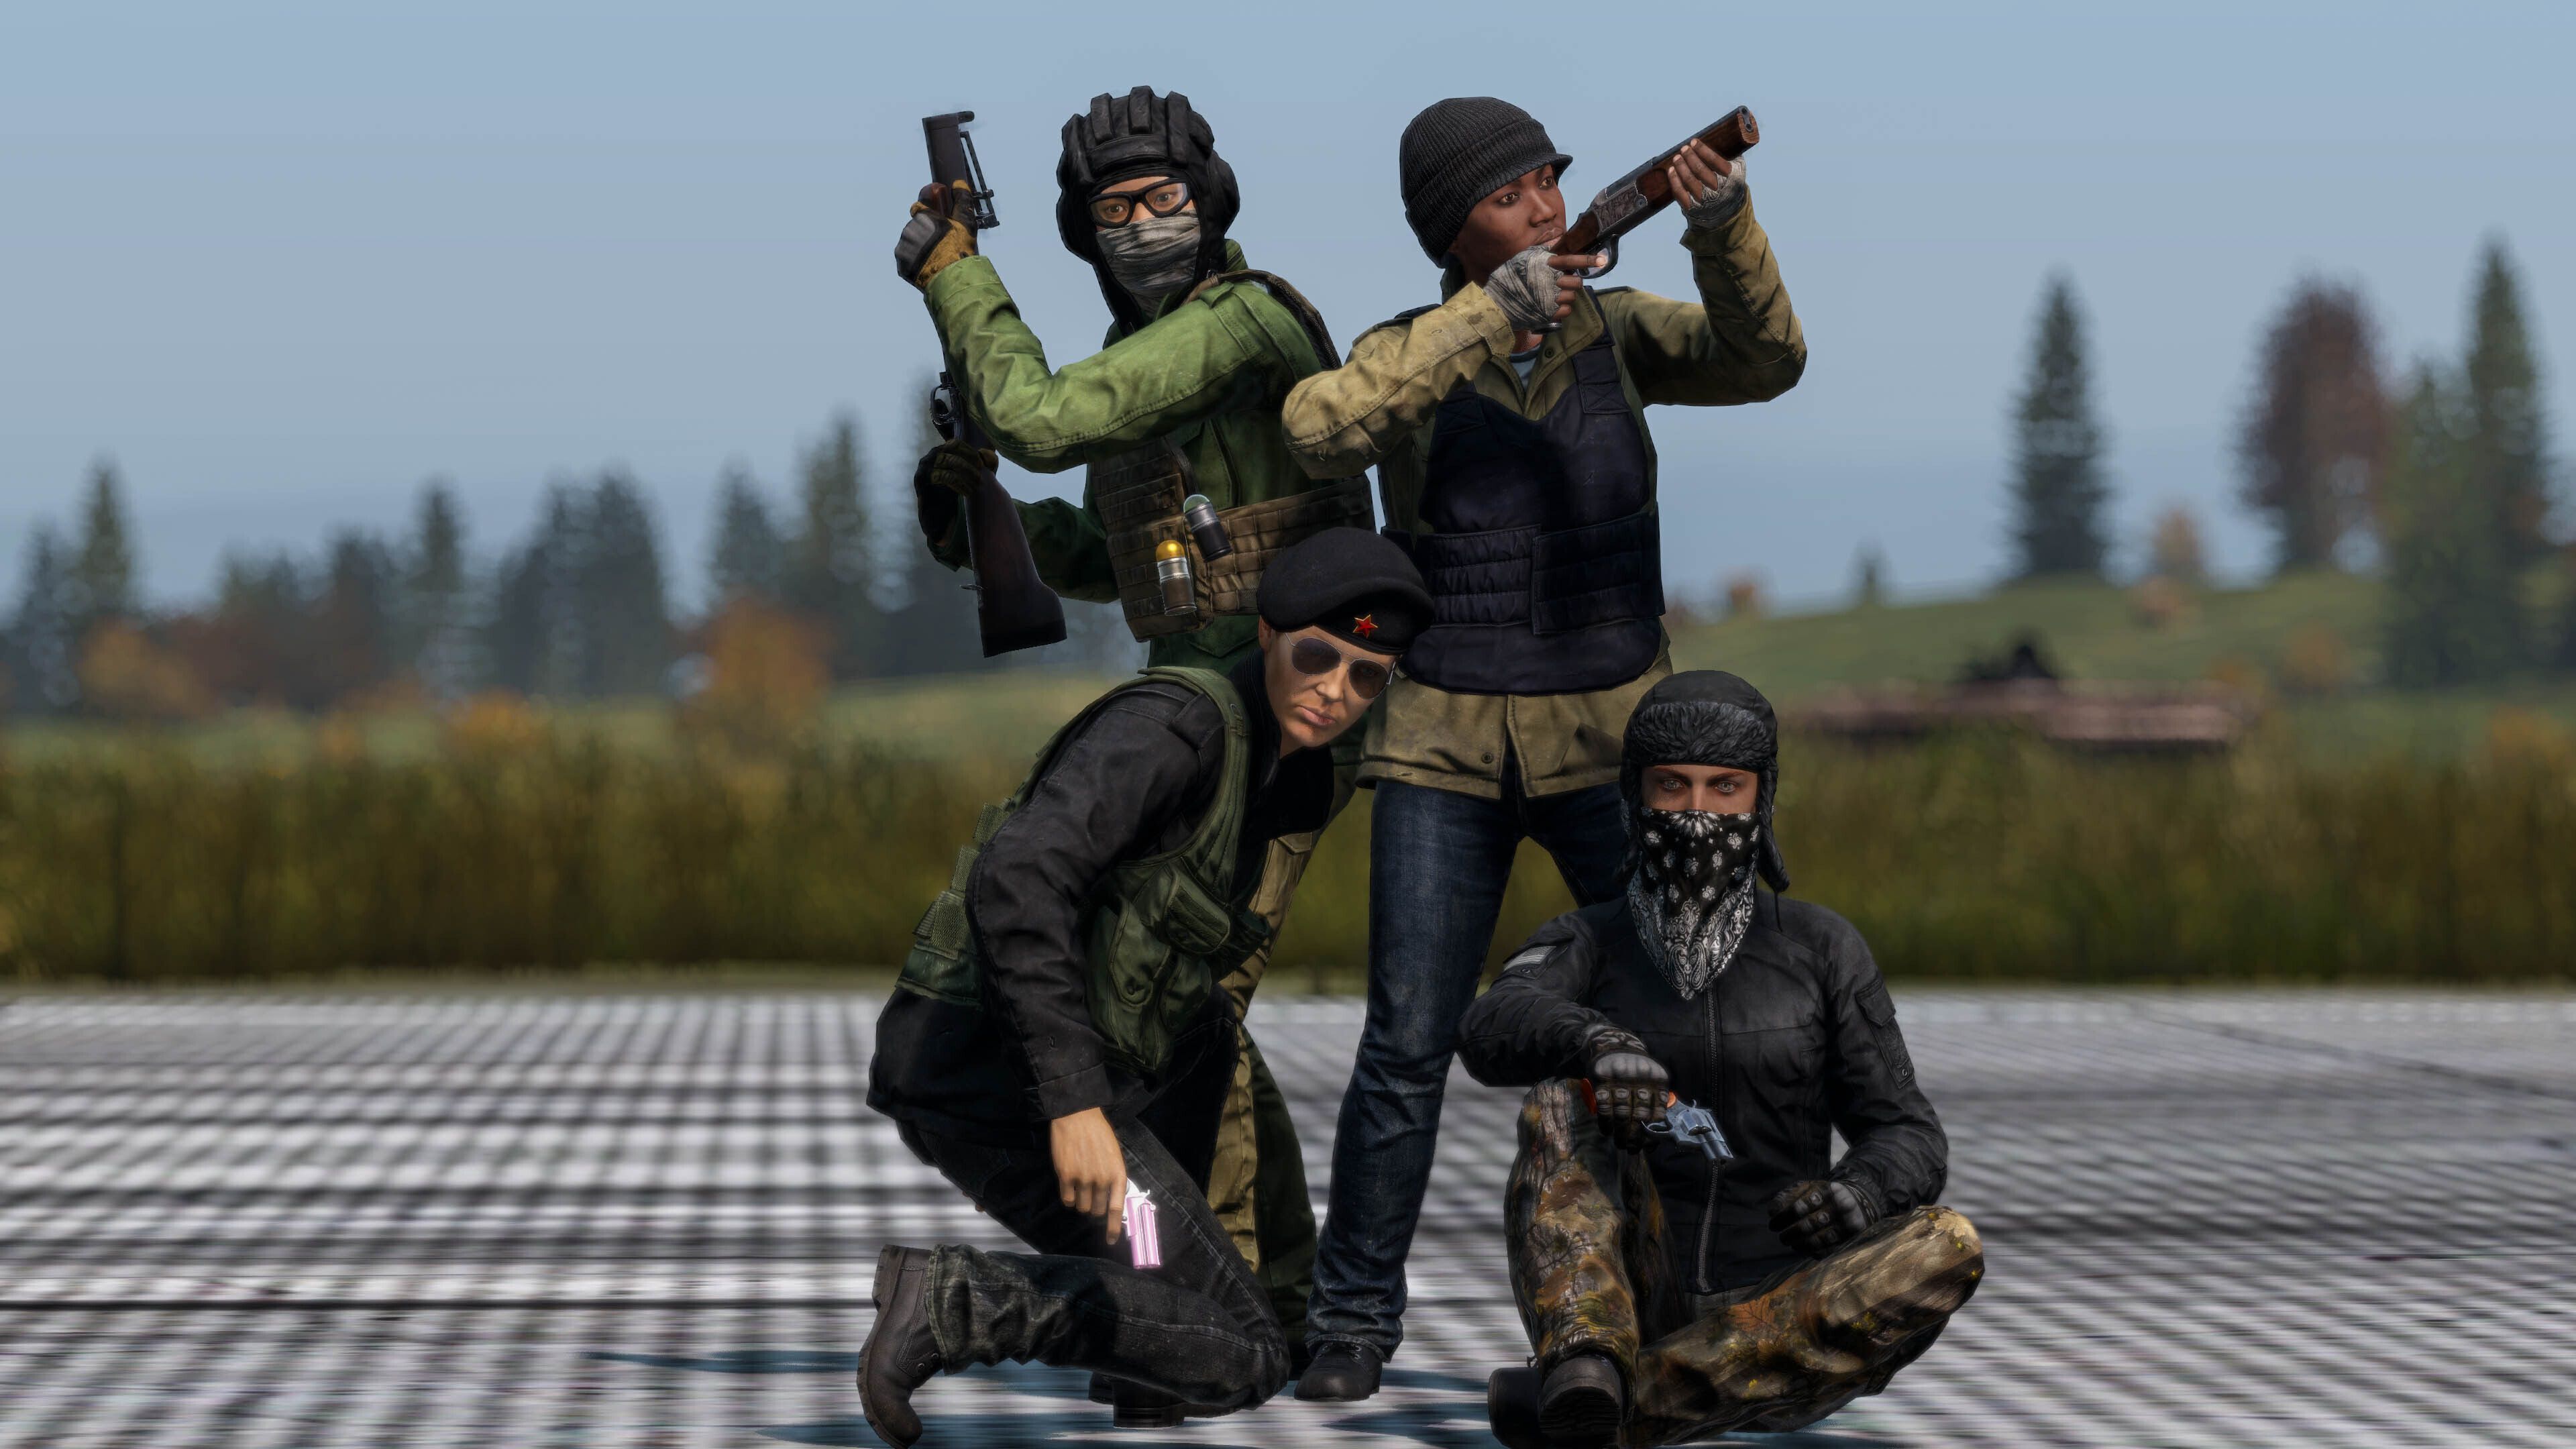 DayZ - PC PLAYERS: You can now download the new